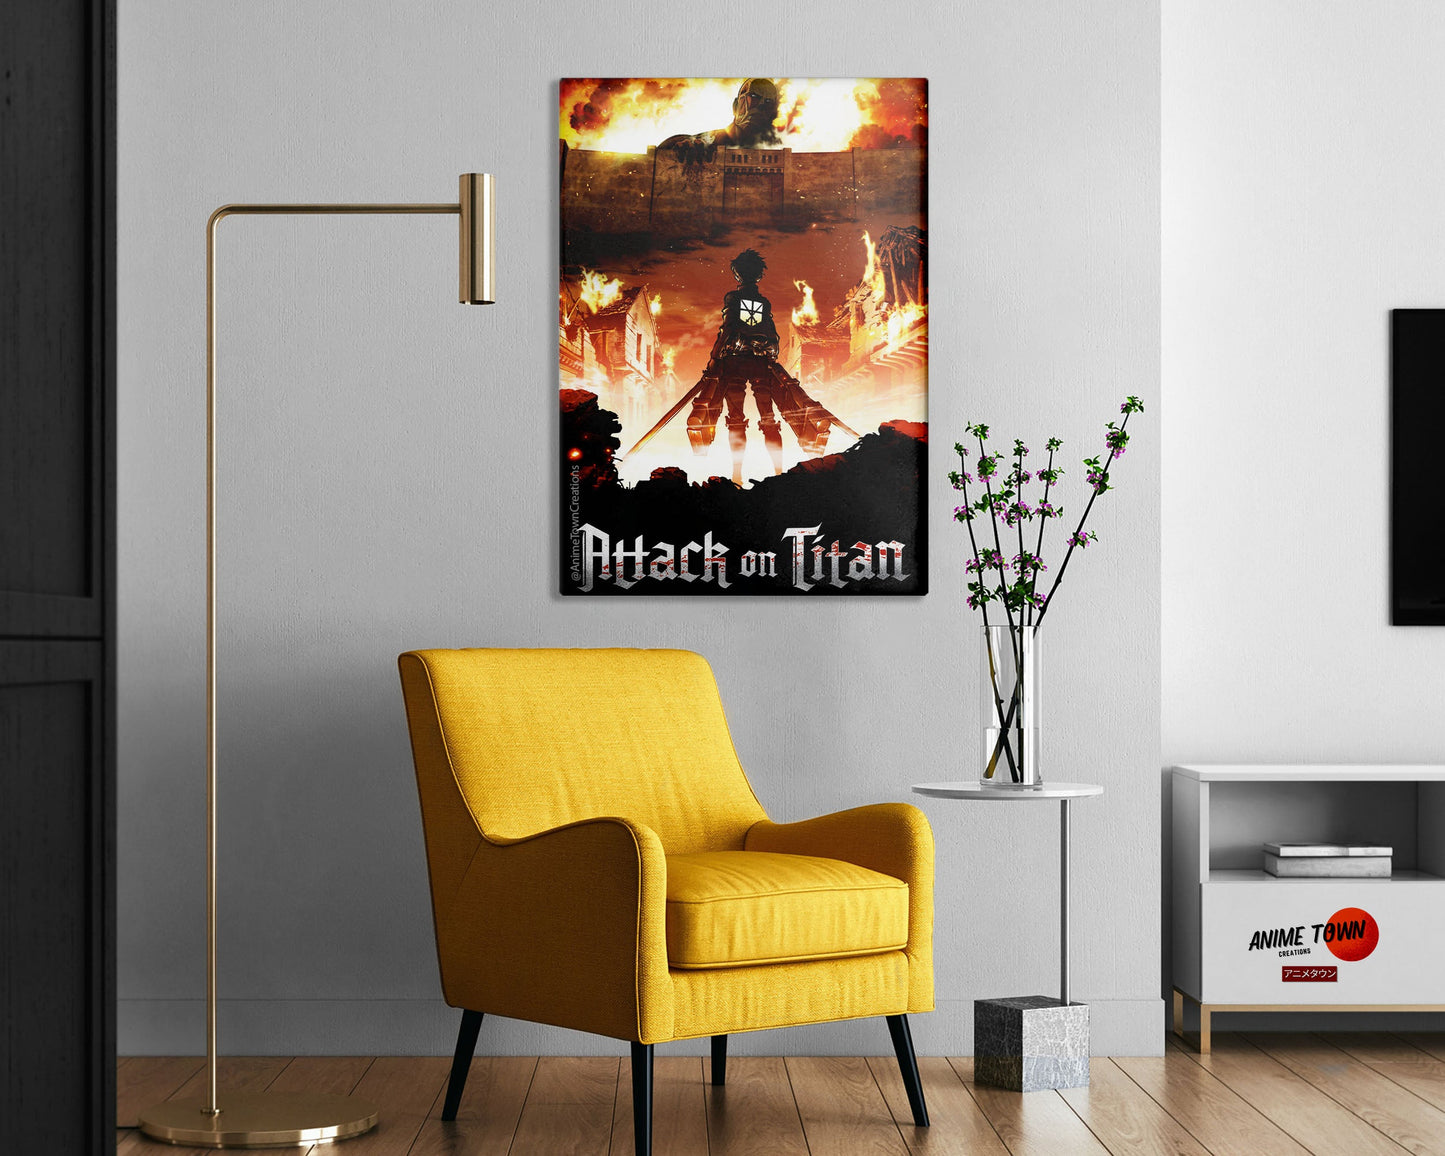 Anime Town Creations Metal Poster Attack on Titan Wall 24" x 36" Home Goods - Anime Attack on Titan Metal Poster